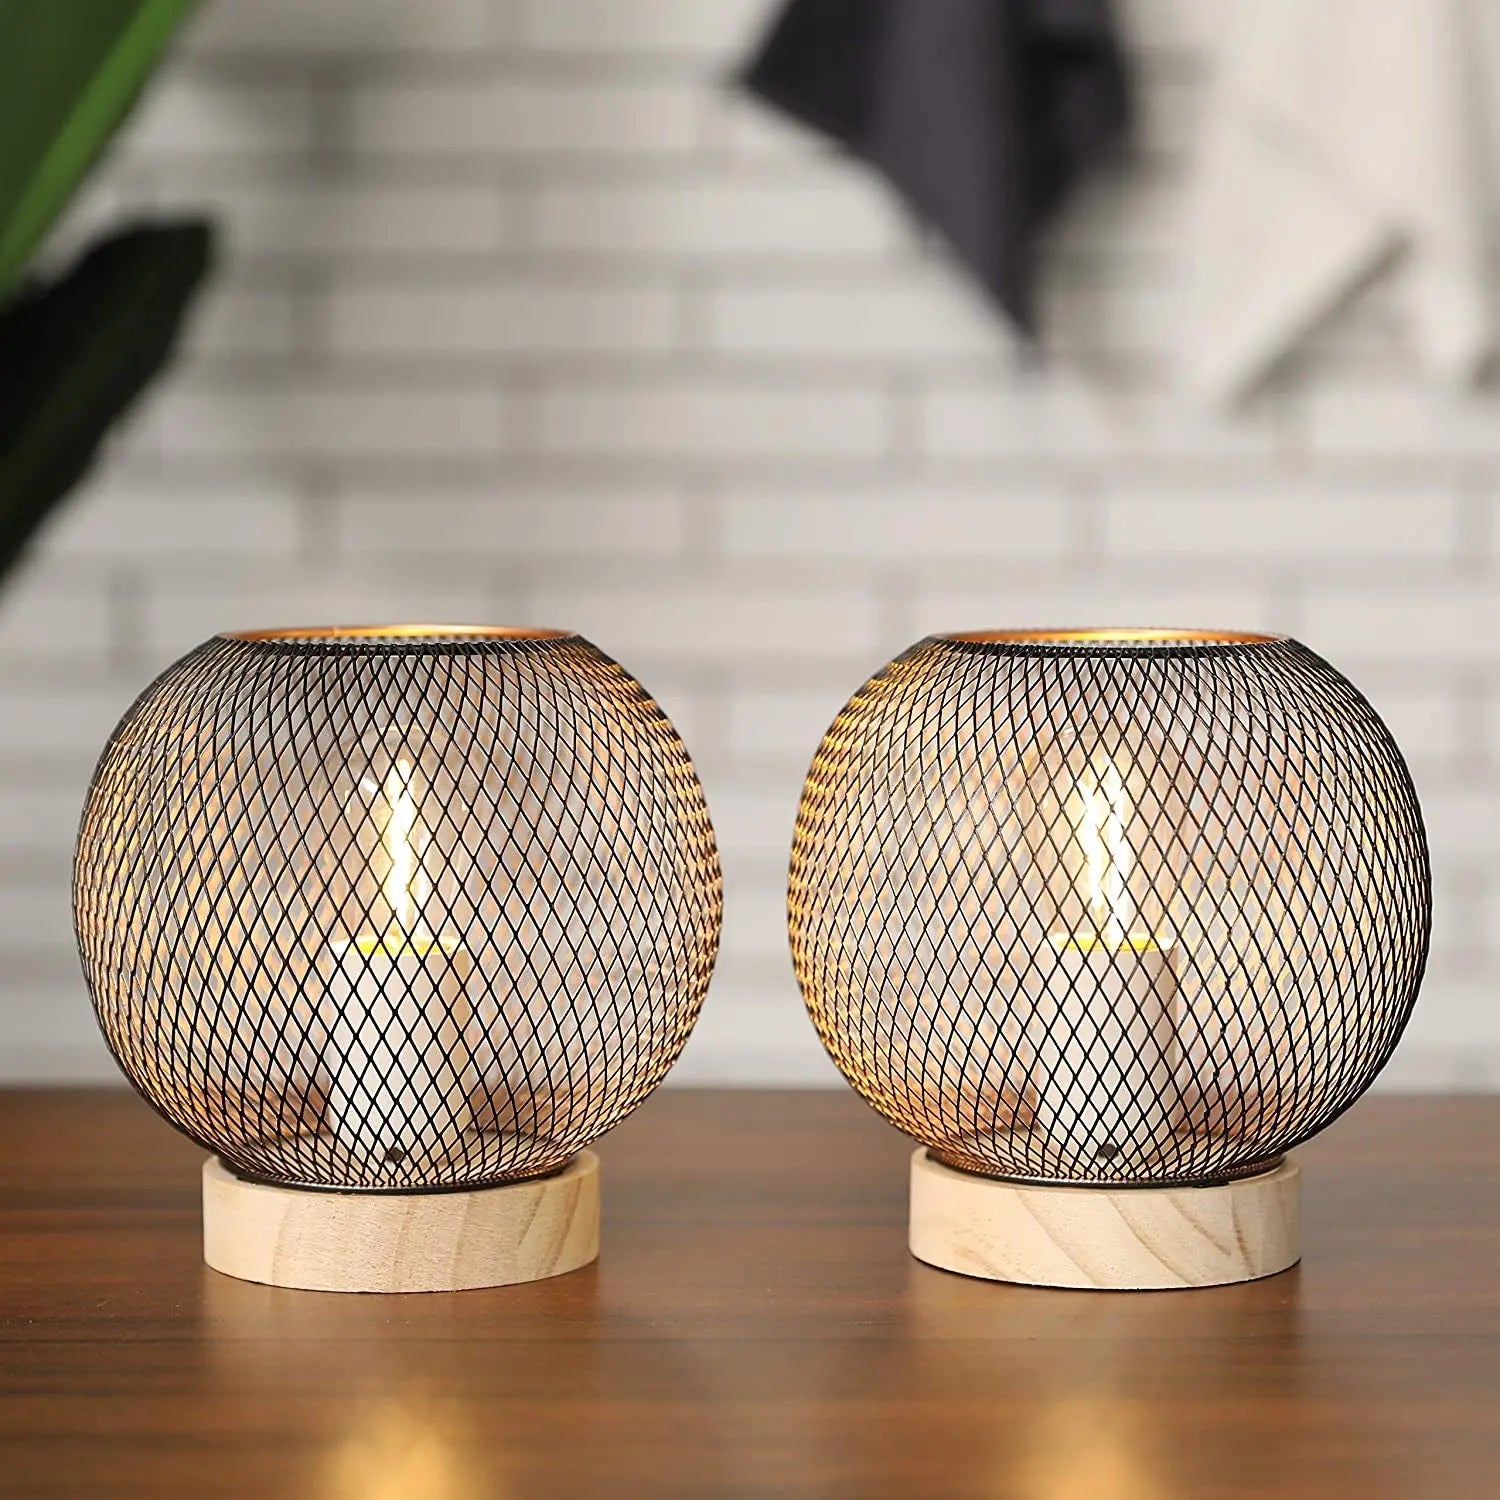 Set of 2 Table Lamp Metal Mesh Modern Battery Powered with 6-Hours Timer Feature 7.5''High Decorative Cordless Lamp for Balcony Indoor Table Garden Party Home(Circular,With Wooden Base)